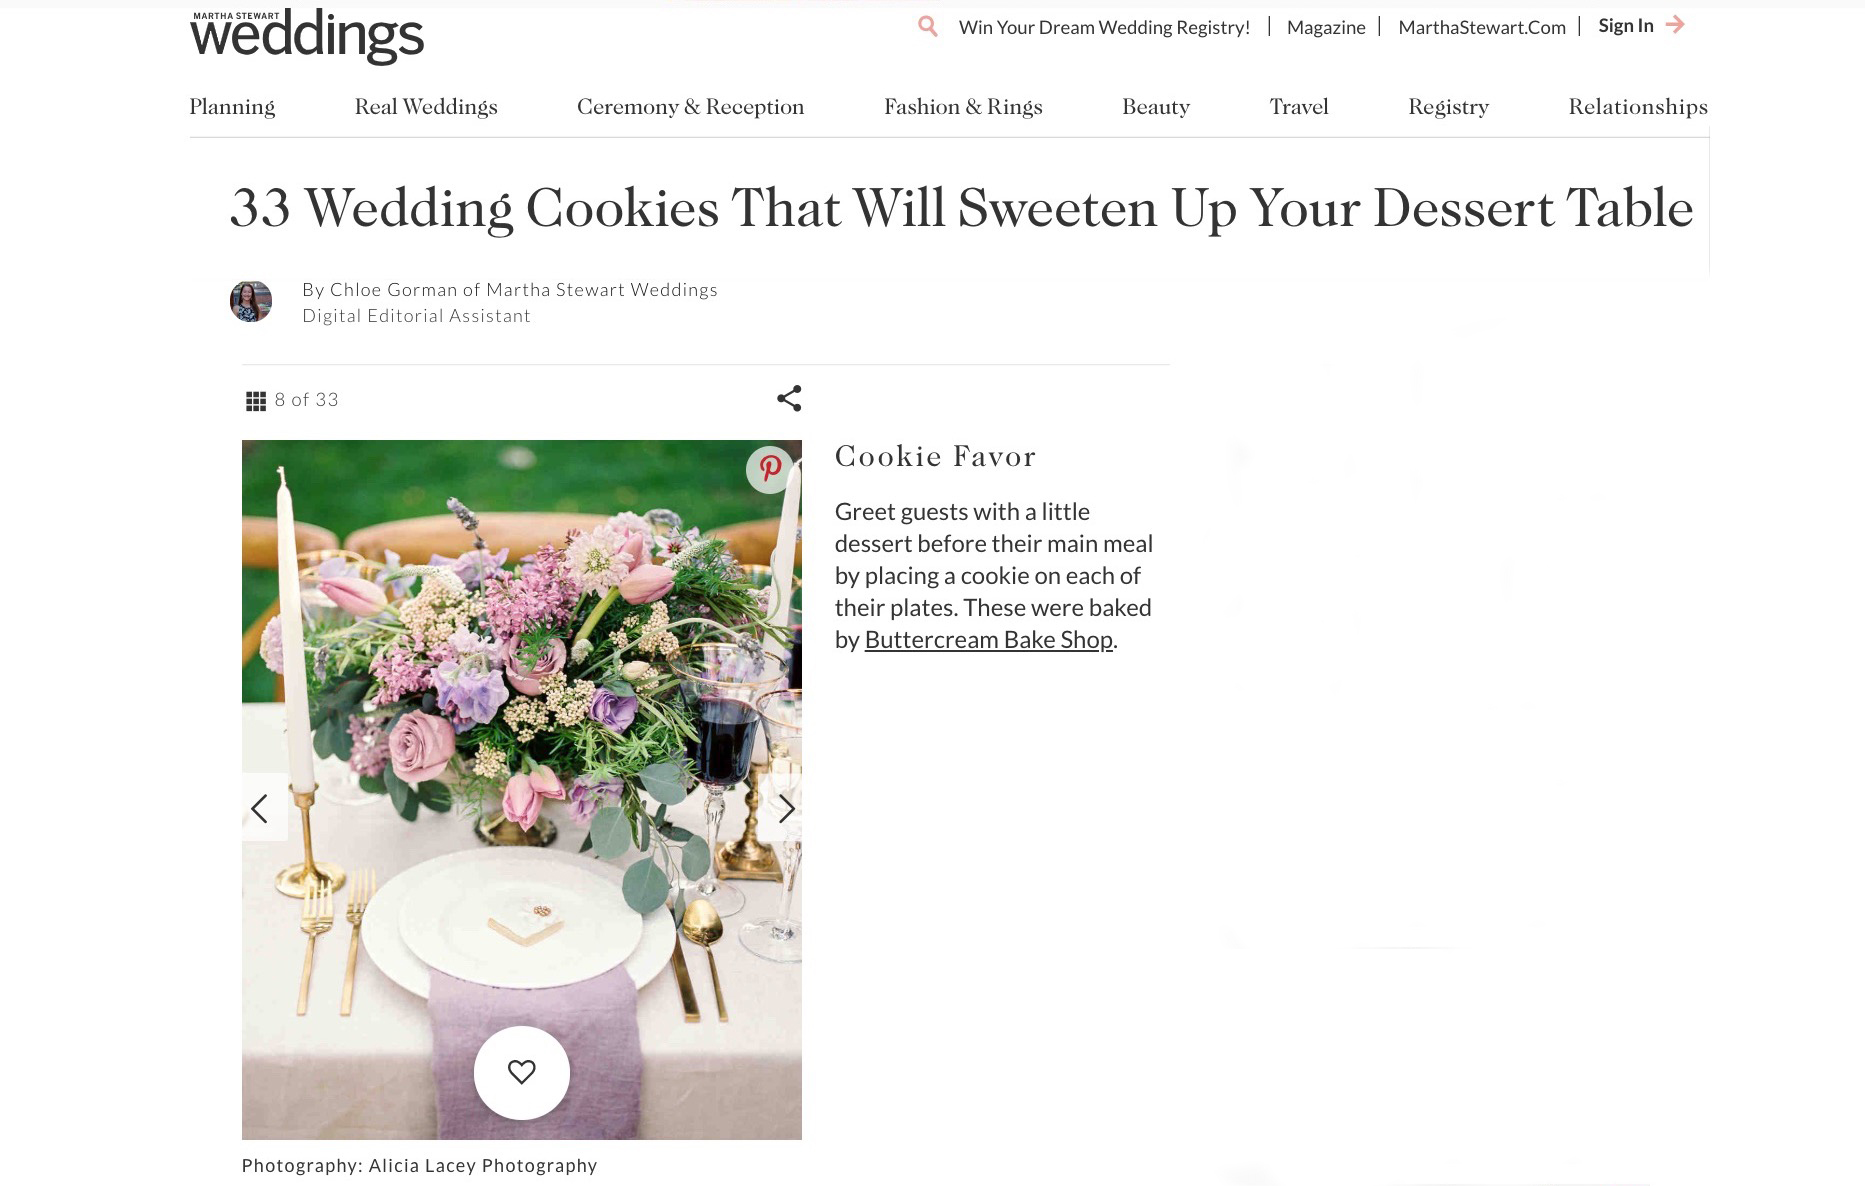 Martha Stewart Weddings featured 33 images of wedding cookie inspiration, including one by this Washington, DC-based wedding photographer at Tudor Place.